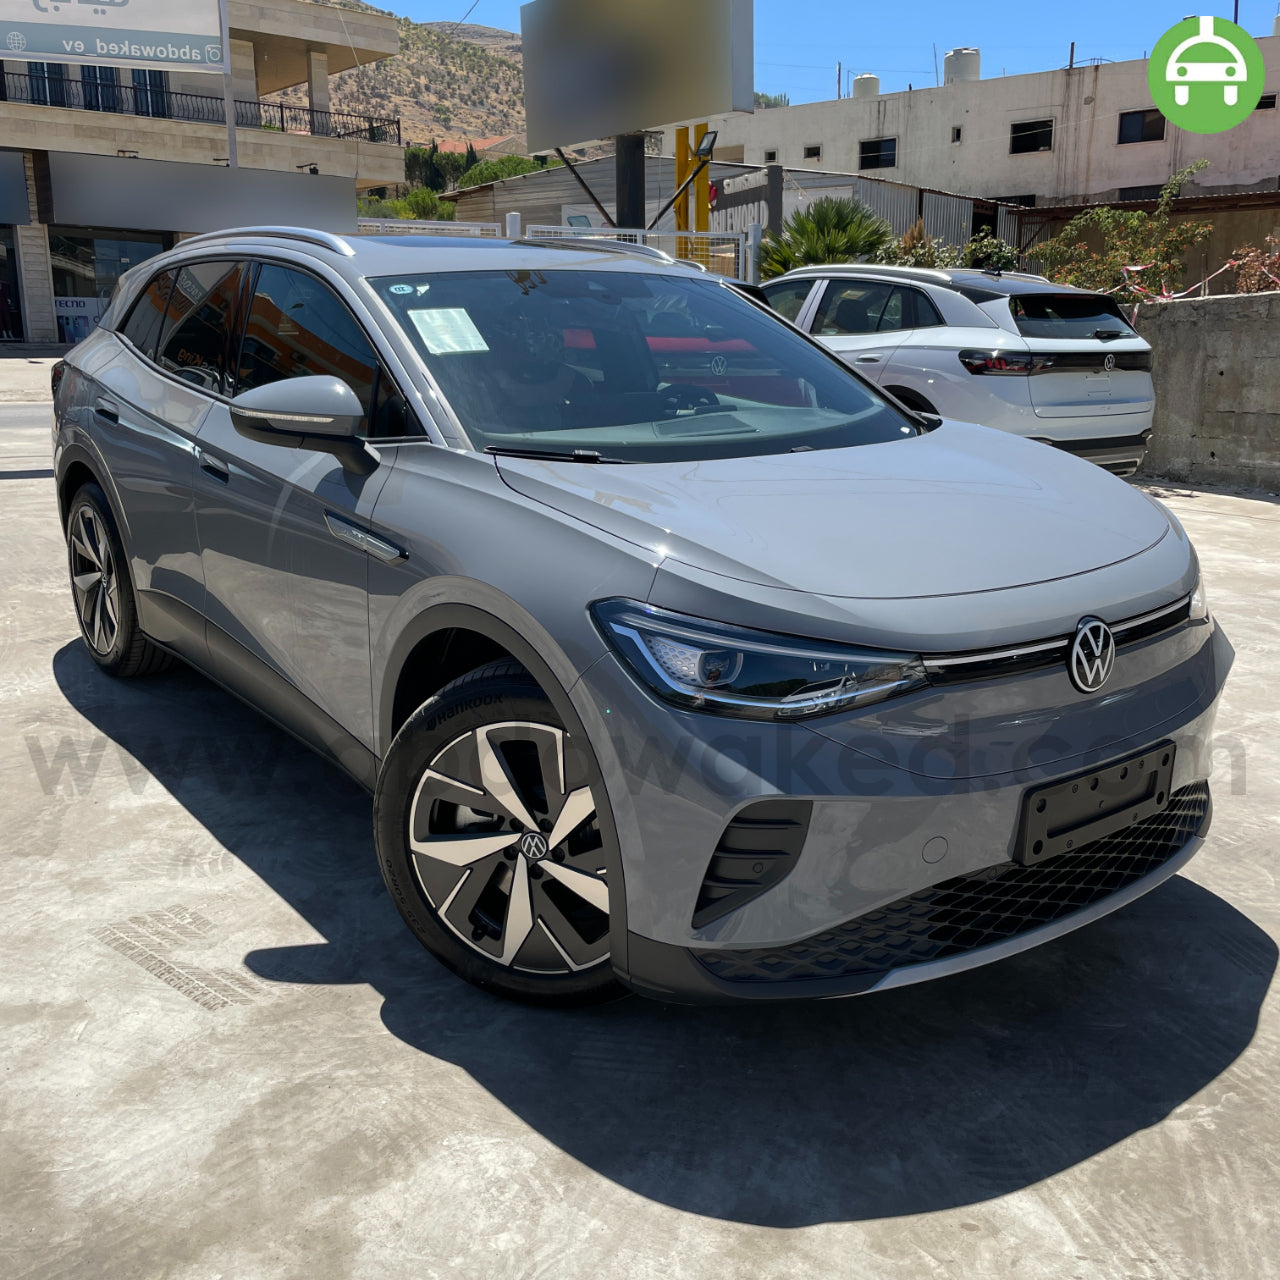 VW ID4 Crozz Pure+ 2022 Nardo Grey Color 600km Range/Charge Fully Electric Car (New - 0KM)